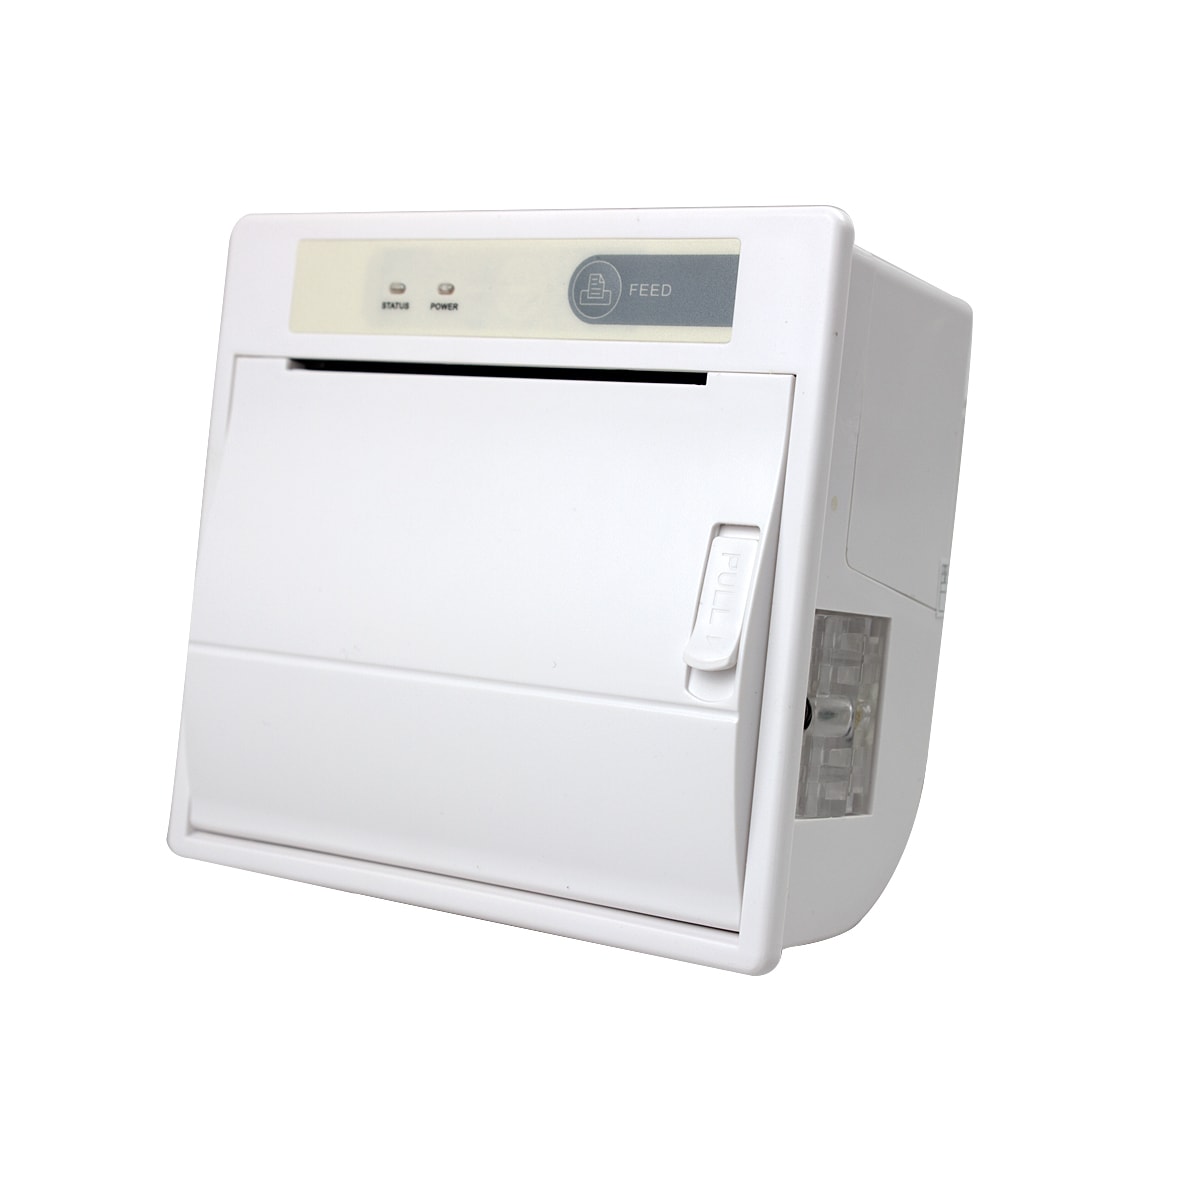 EP-360CH 80mm width high-speed mini panel thermal printer with auto-cutter